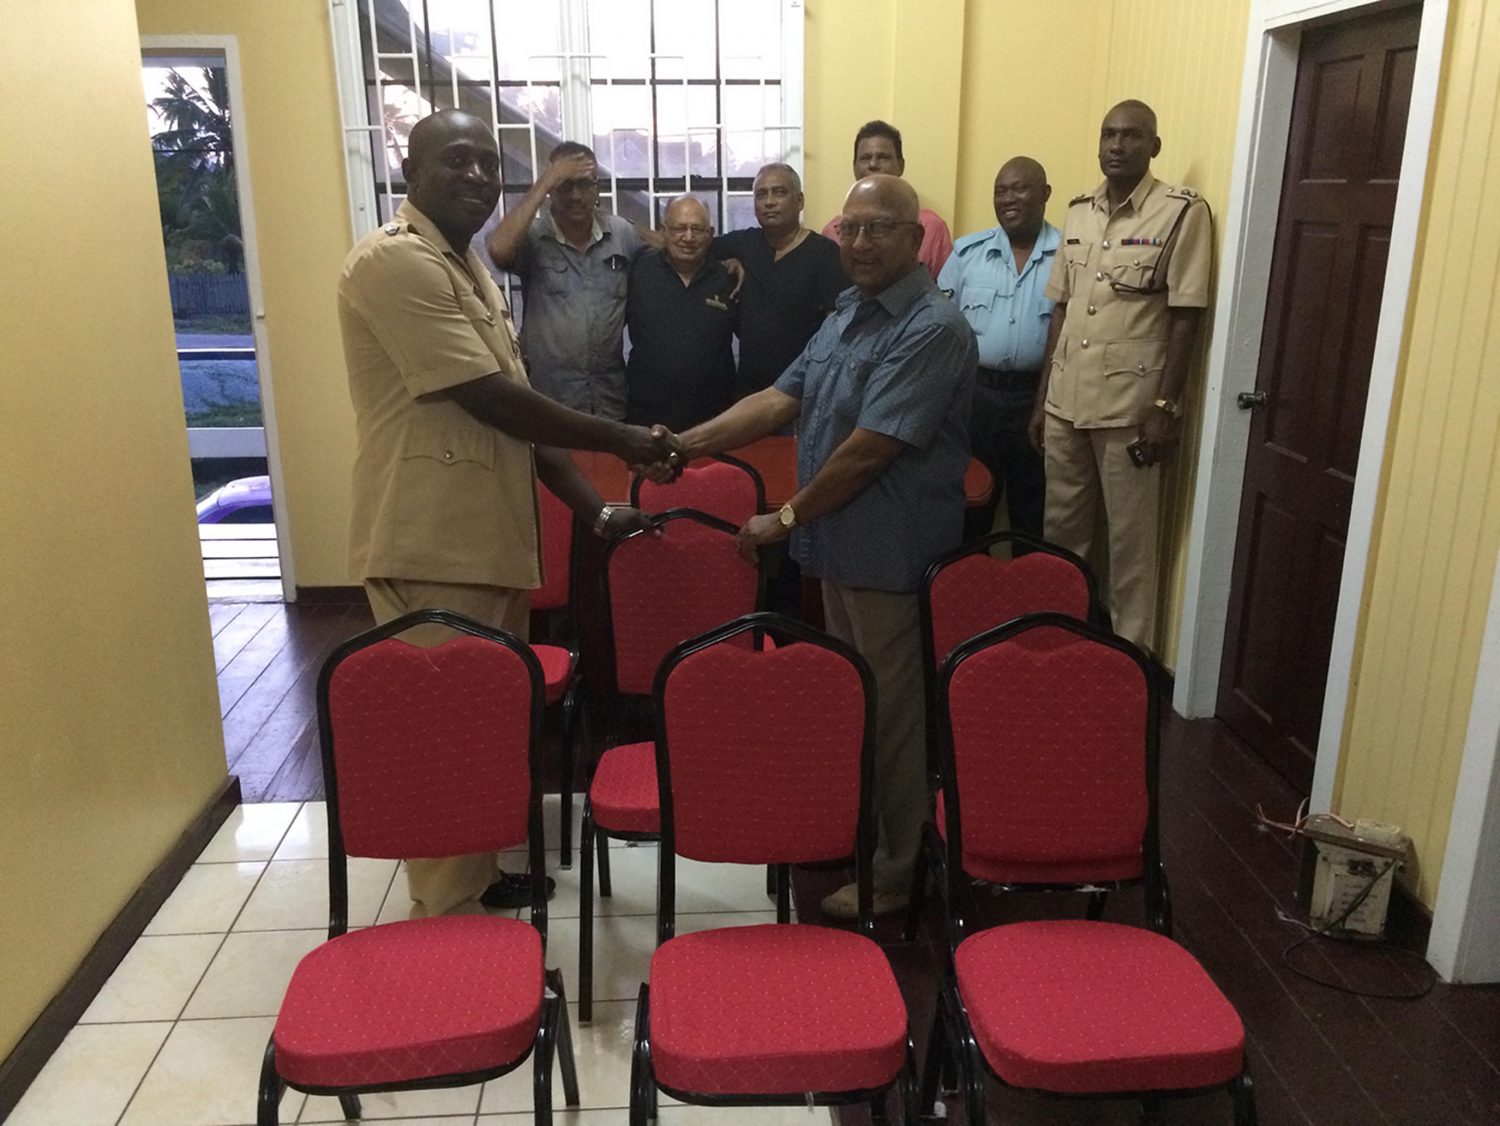 In photo,  Senior Superintendent Stanton (left) receives the furniture from Taajnauth Jadunauth in the presence of, from left (in background), Members J. Deodass, S. Mohamed, S. Shahib, M. Ali, Sgt Braithwaite and Inspector John.